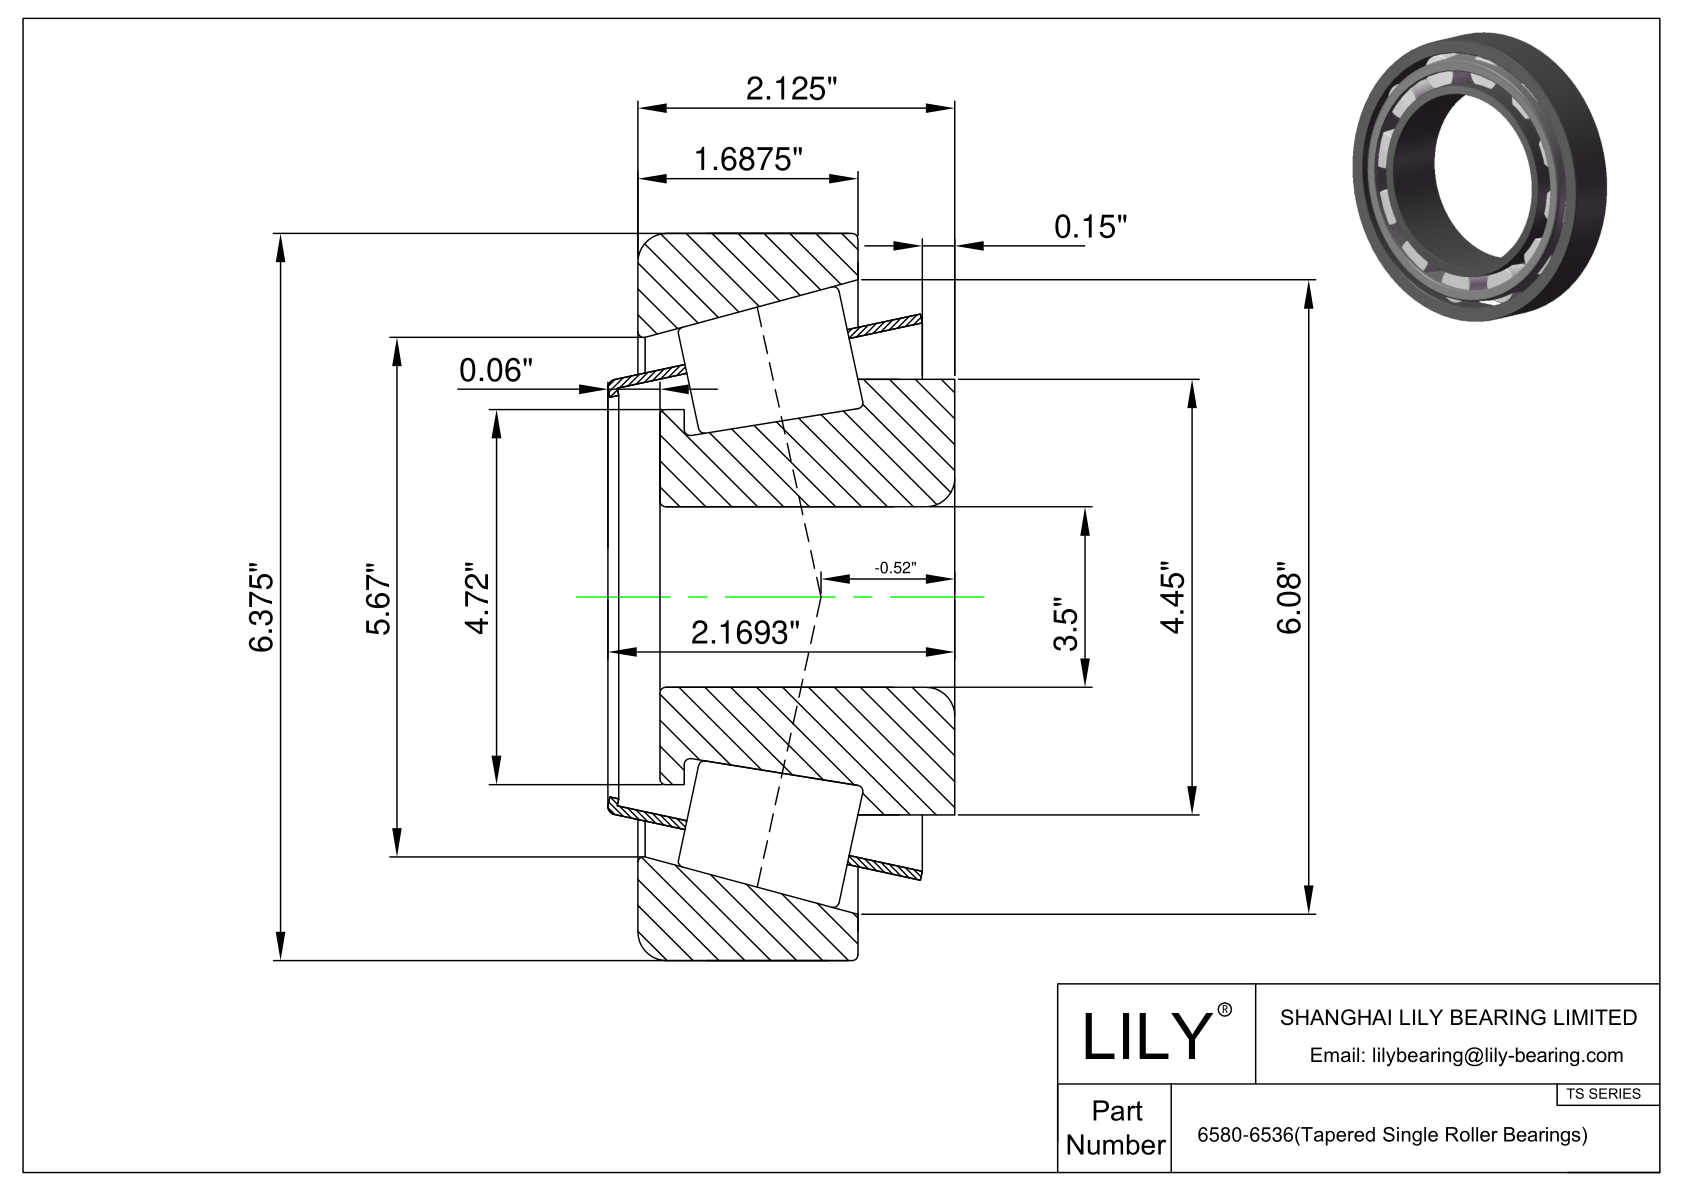 6580-6536 TS (Tapered Single Roller Bearings) (Imperial) cad drawing